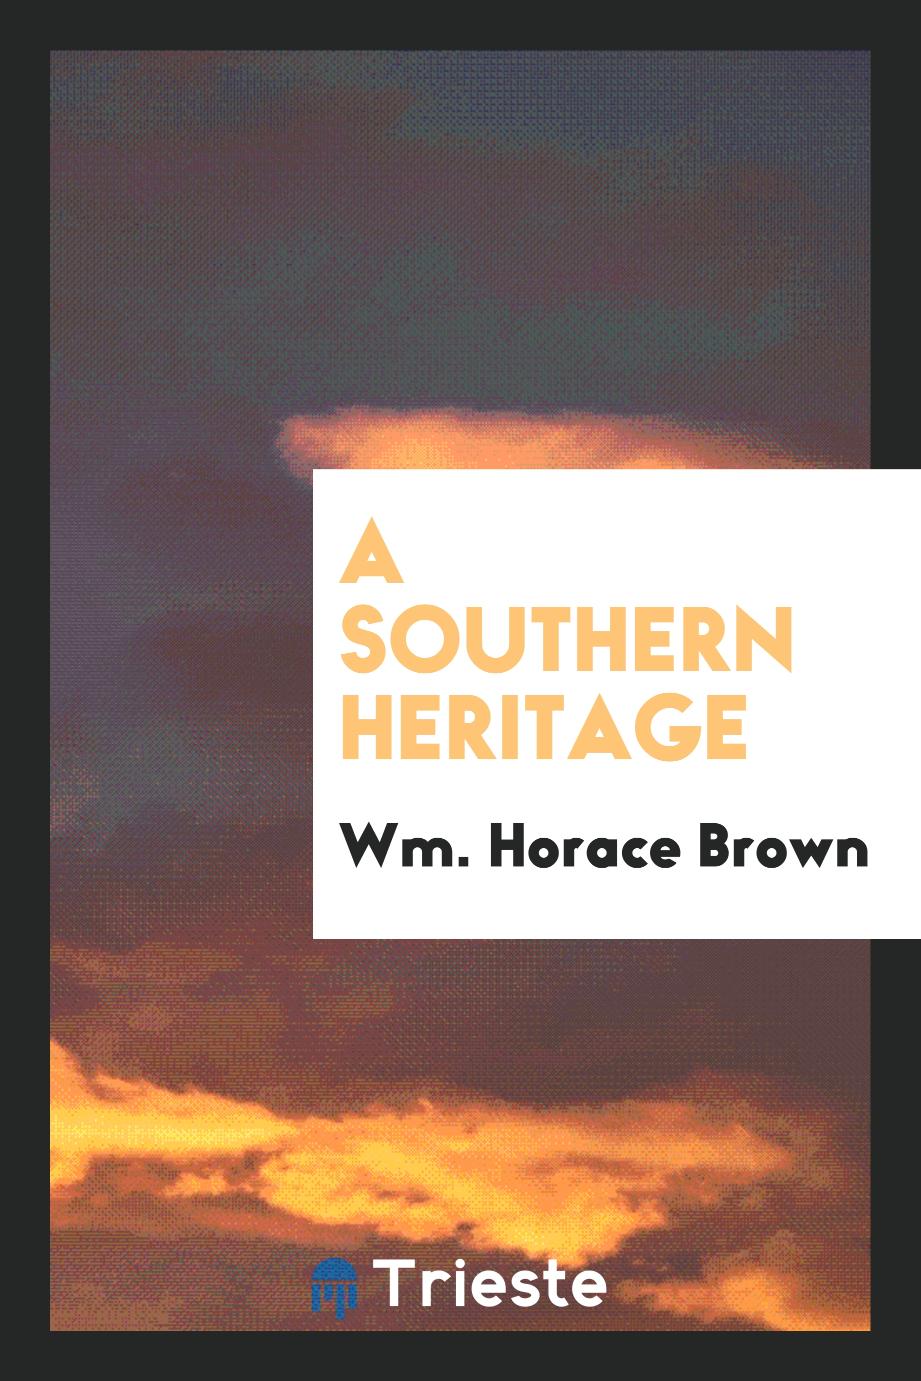 A southern heritage